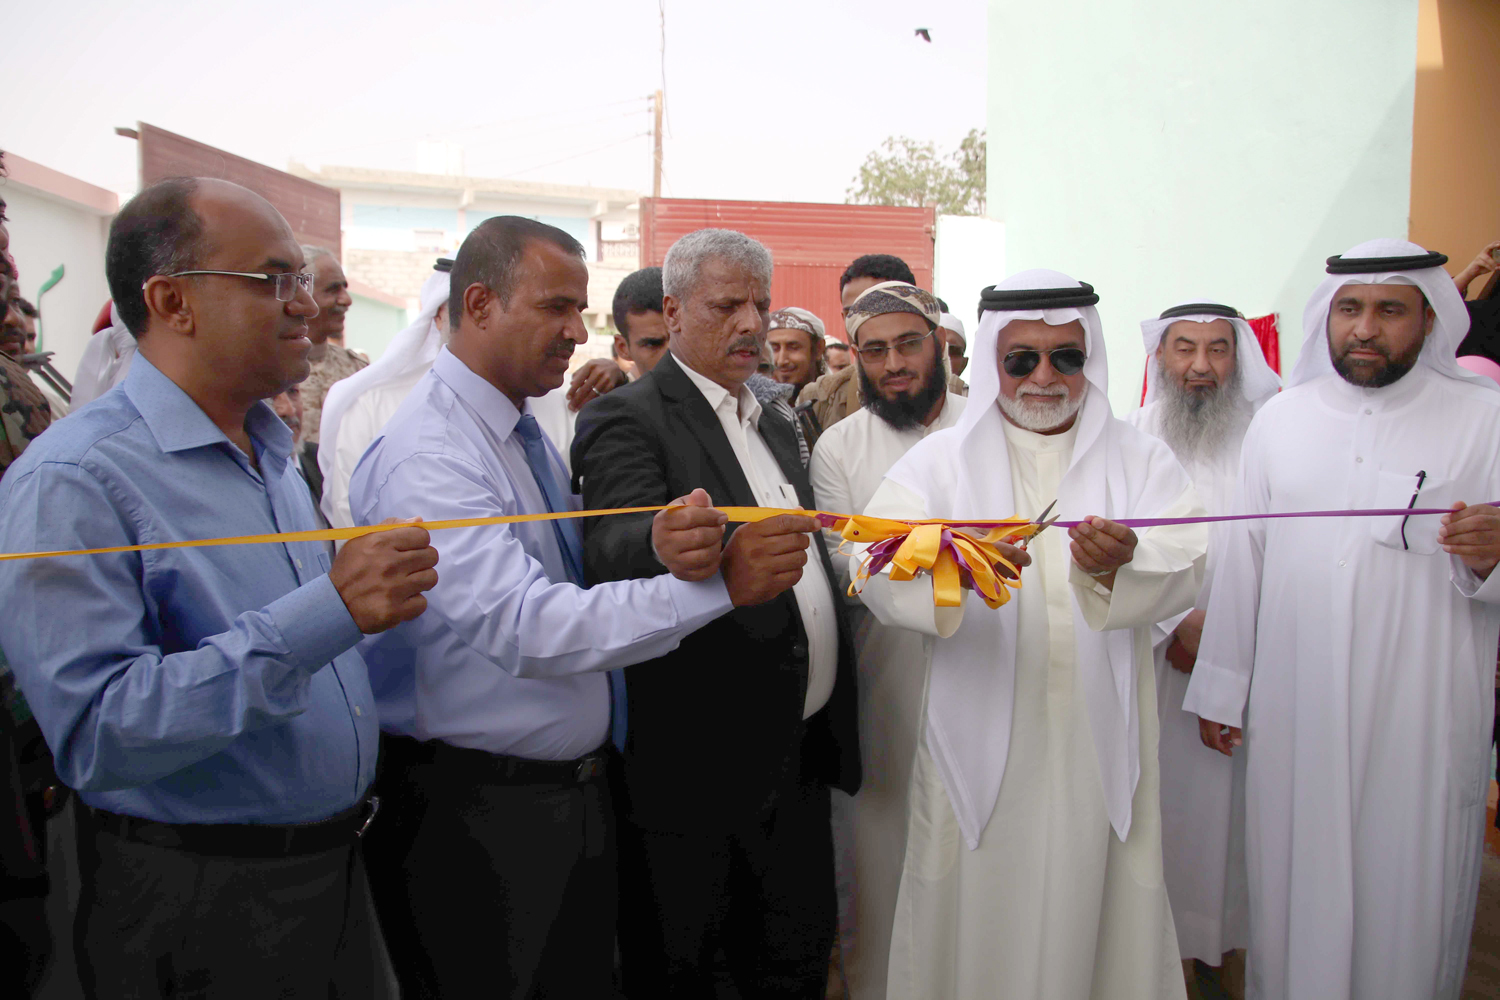 Delegation from the Kuwaiti Relief Society launches special needs school in Yemen